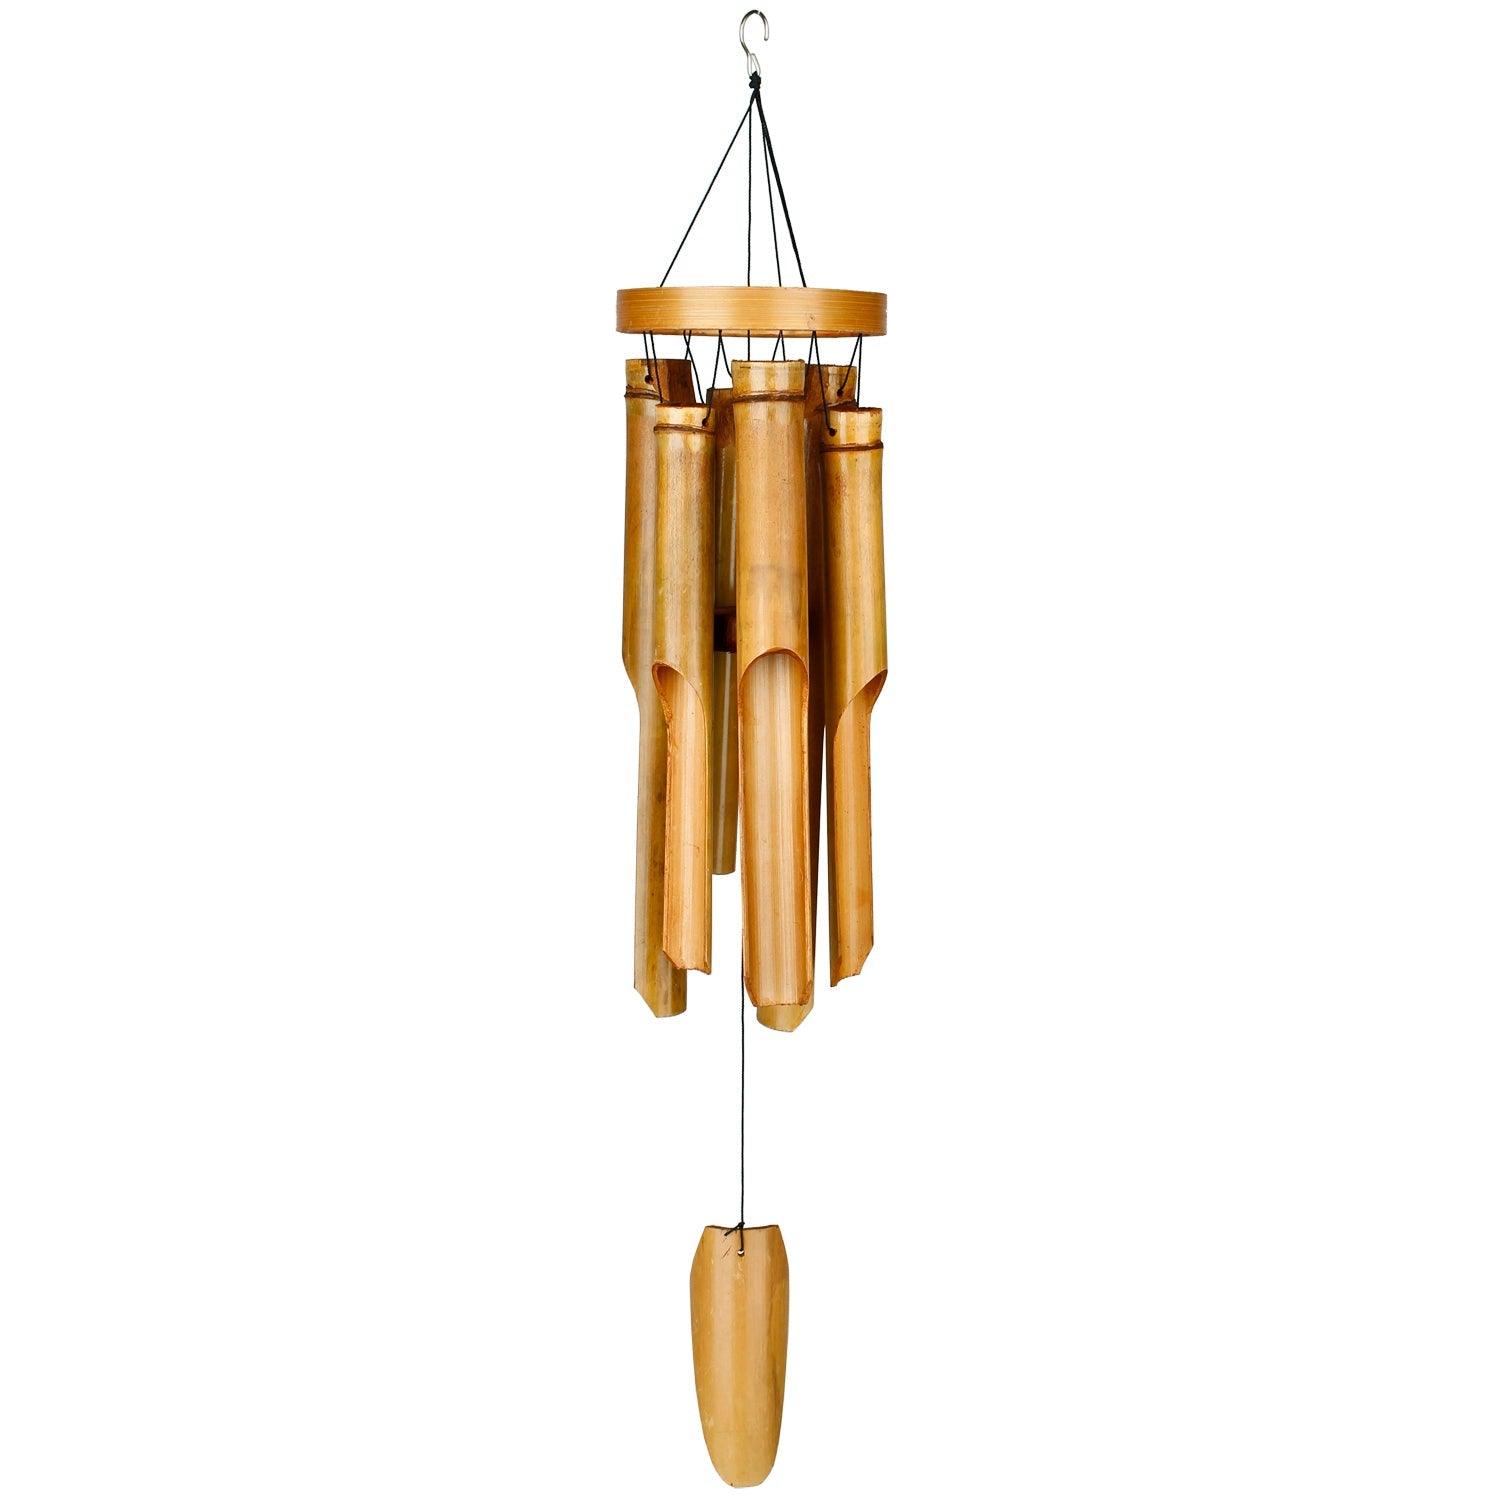 Bring a touch of tranquility to your outdoor space with this natural bamboo chime. Its gentle melodies will create a serene atmosphere while the bamboo top and six bamboo tubes add an earthy, natural element to your garden. Measuring at 37 inches long, it's a perfect addition to any outdoor oasis.